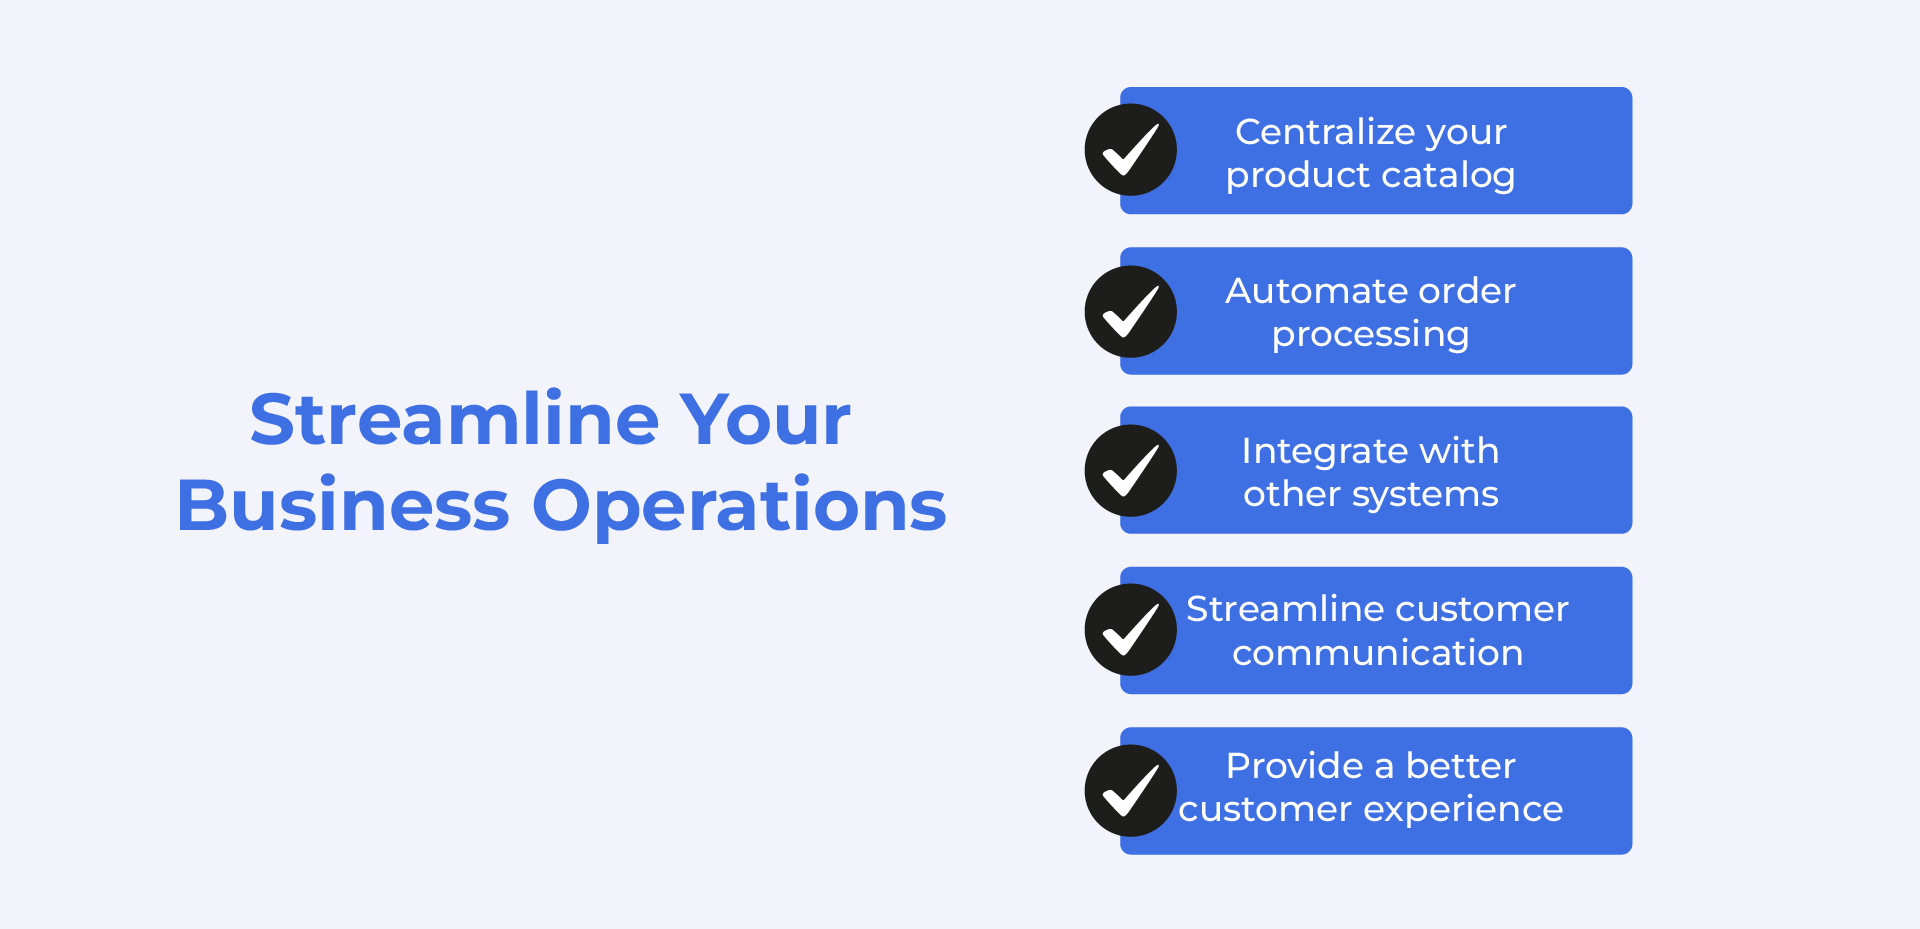 Streamline your business operations with B-2-B ecommerce platform -2